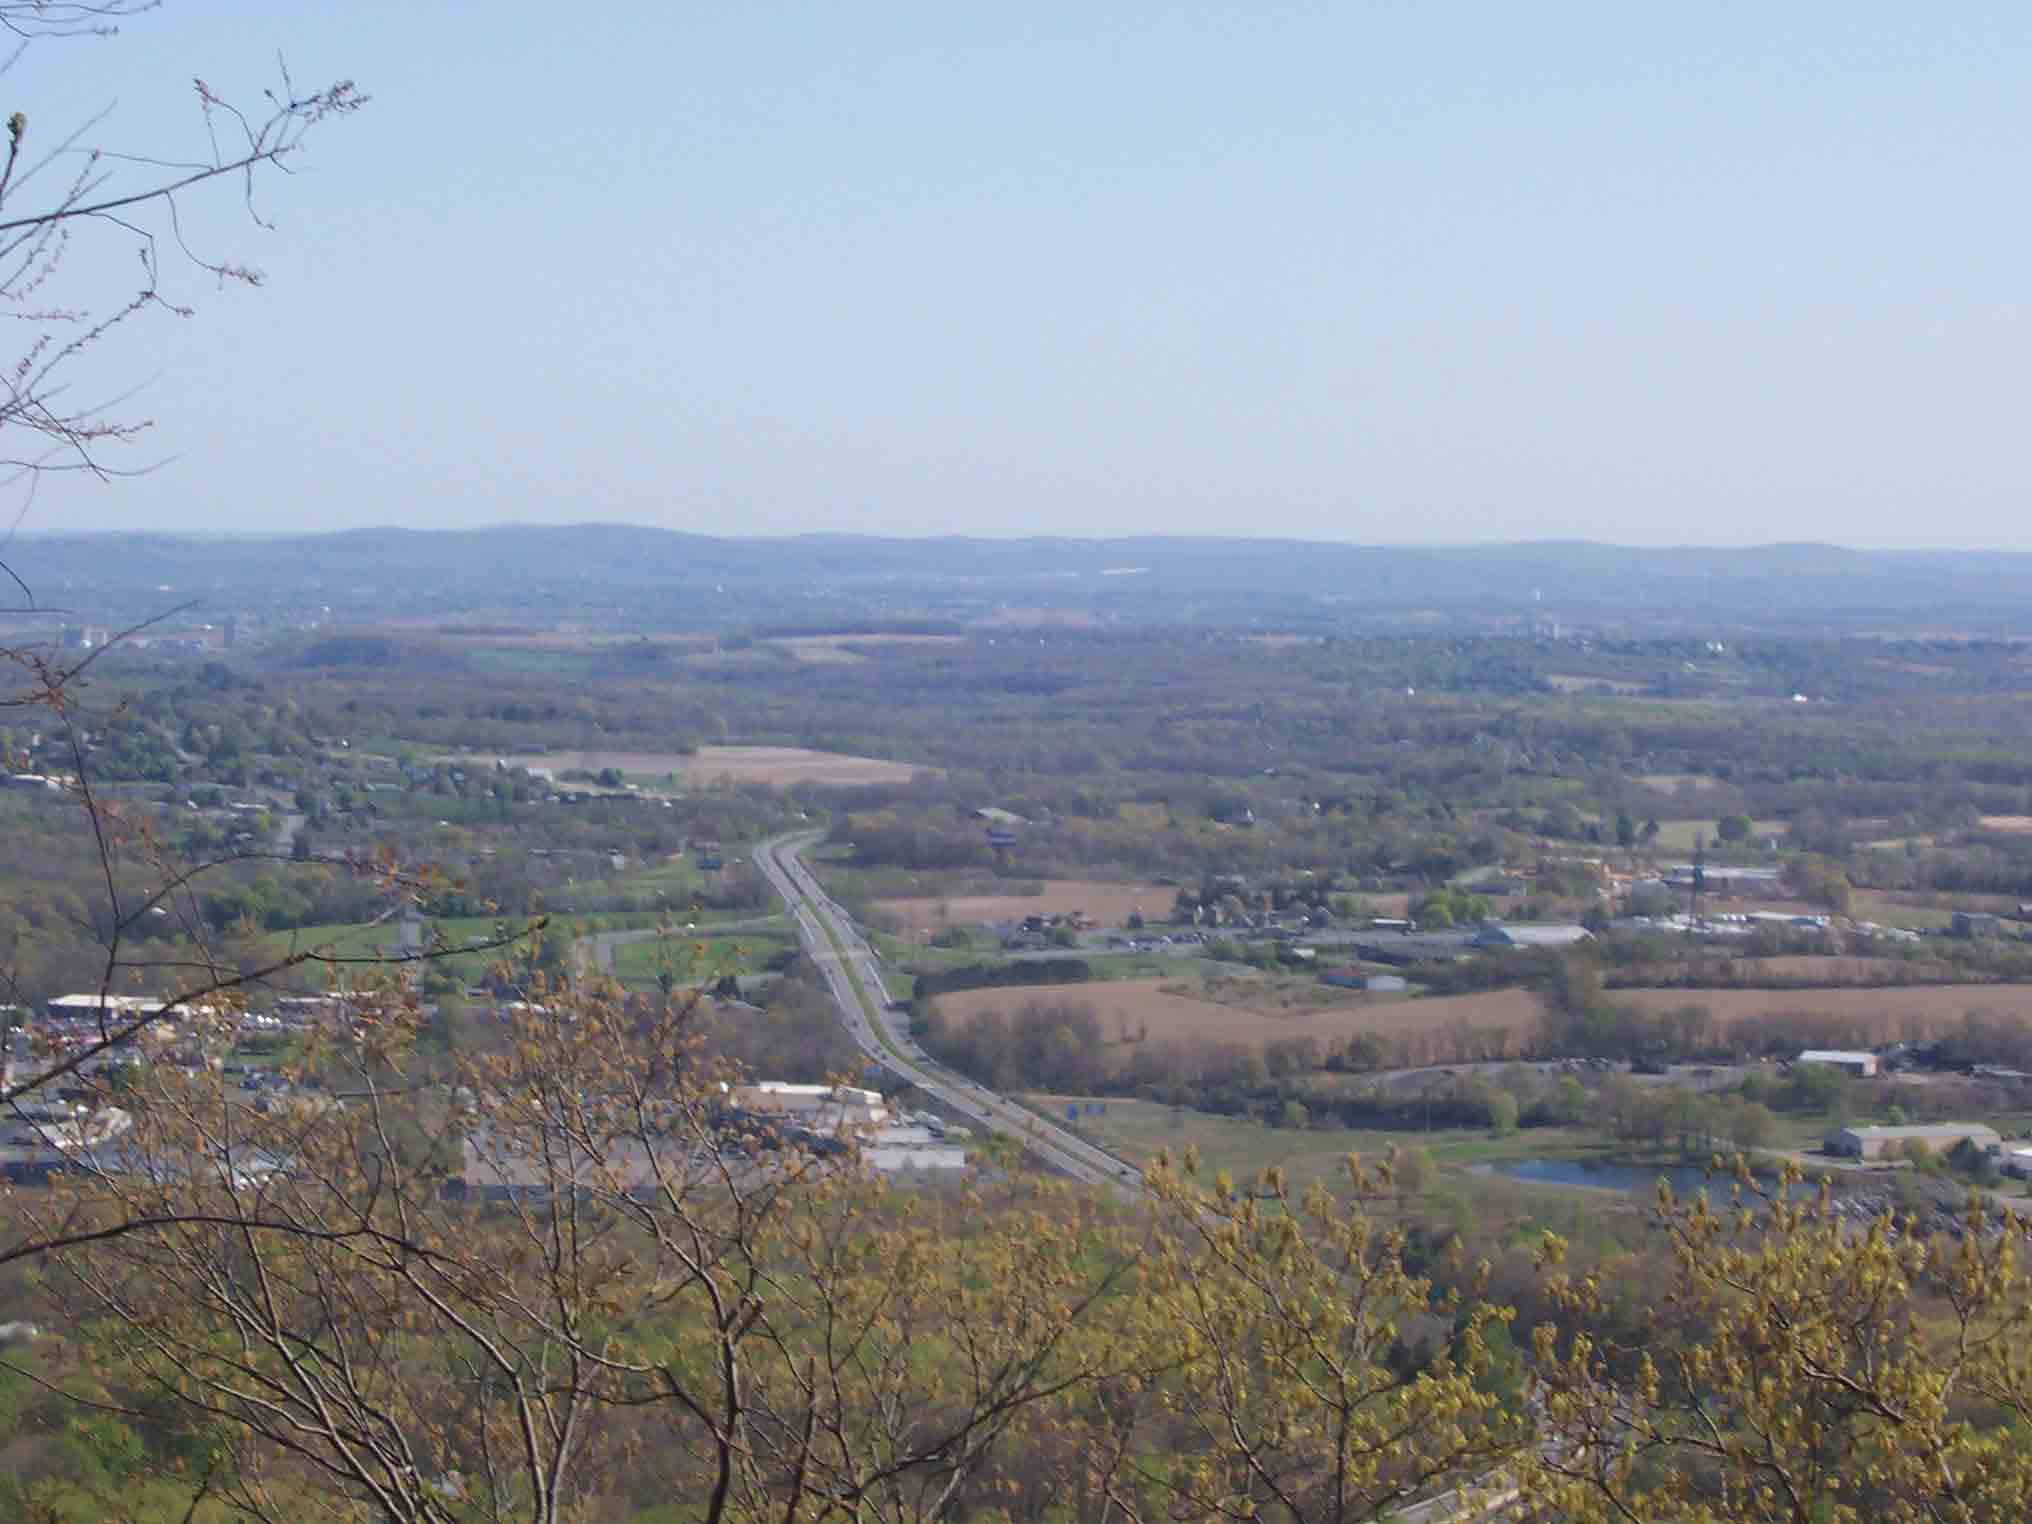 mm 1.0 - Looking south from Hahn's Lookout.  Courtesy dlcul@conncoll.edu